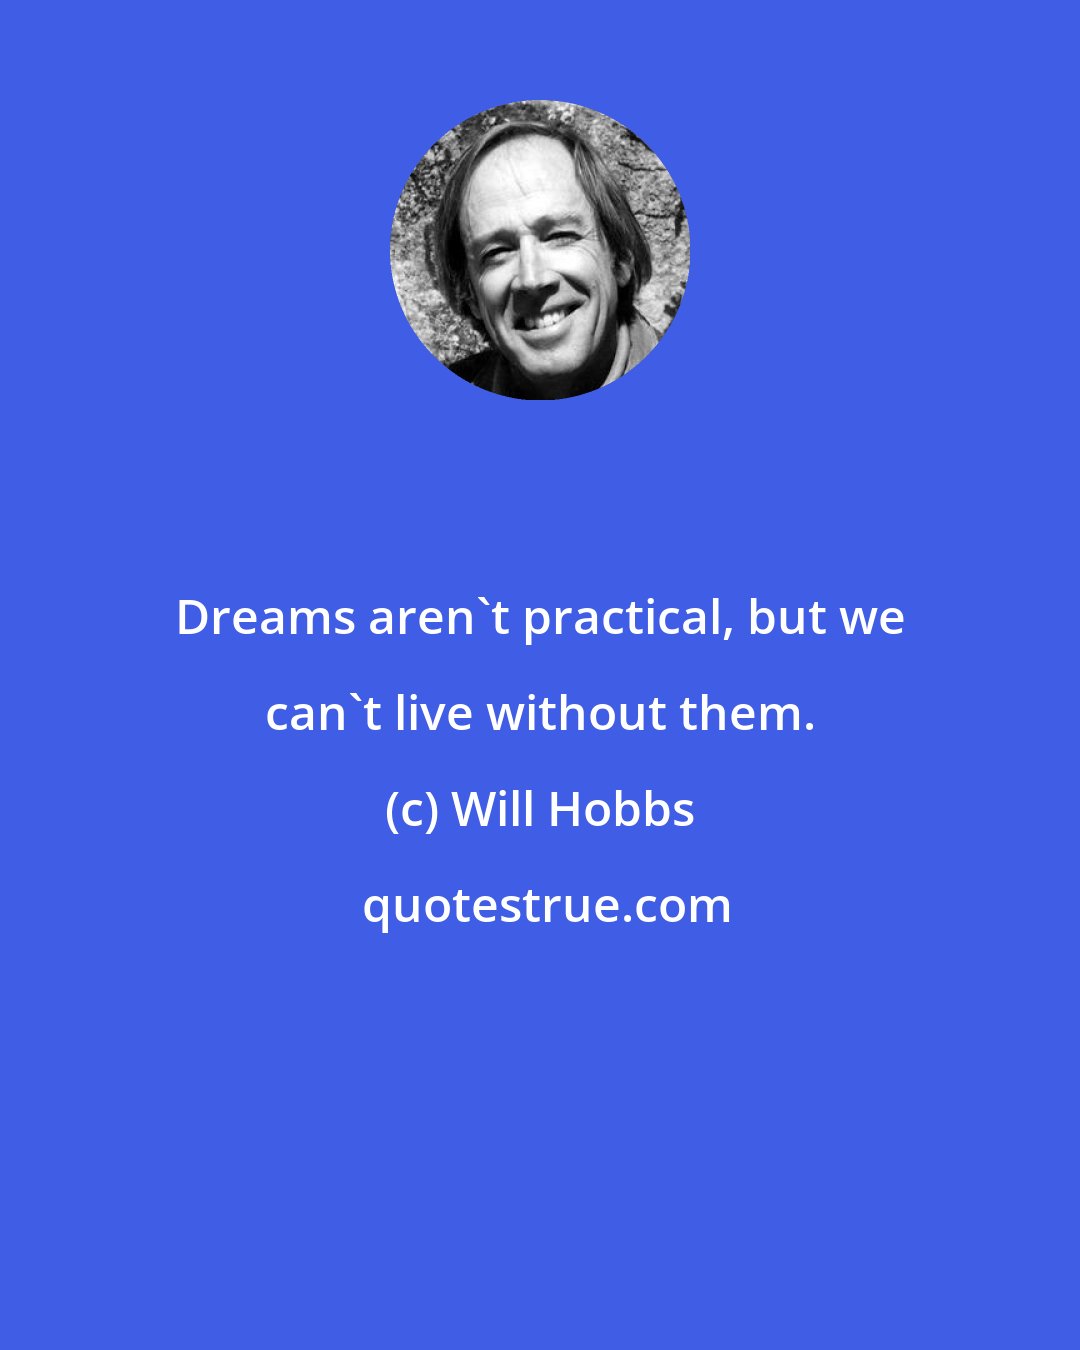 Will Hobbs: Dreams aren't practical, but we can't live without them.